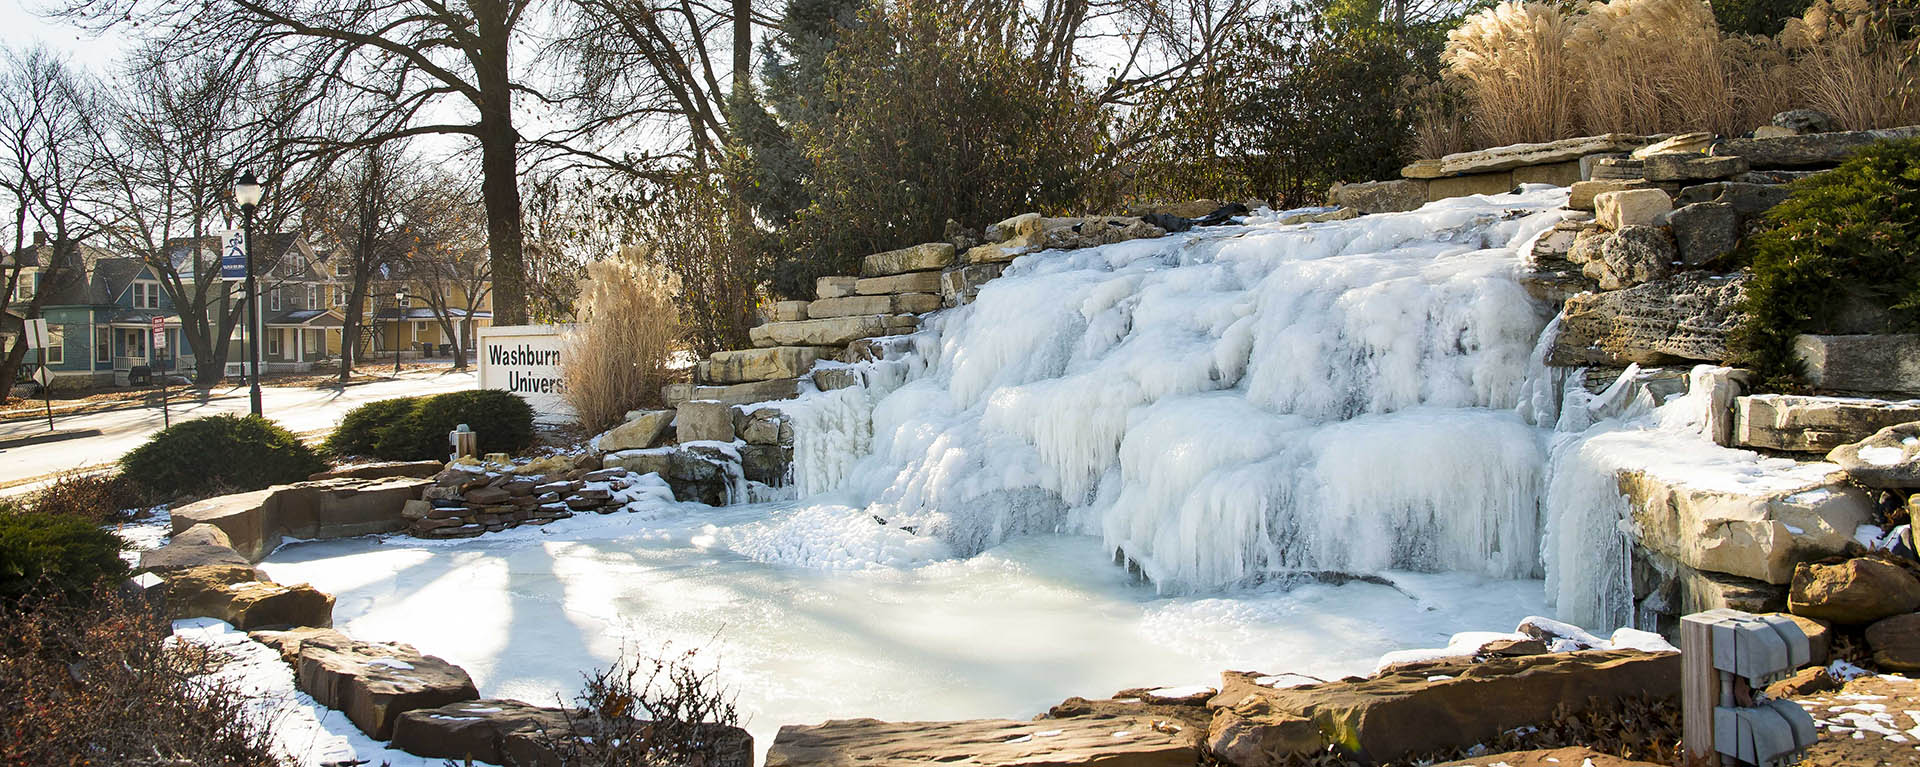 Washburn sign and waterfall in snow